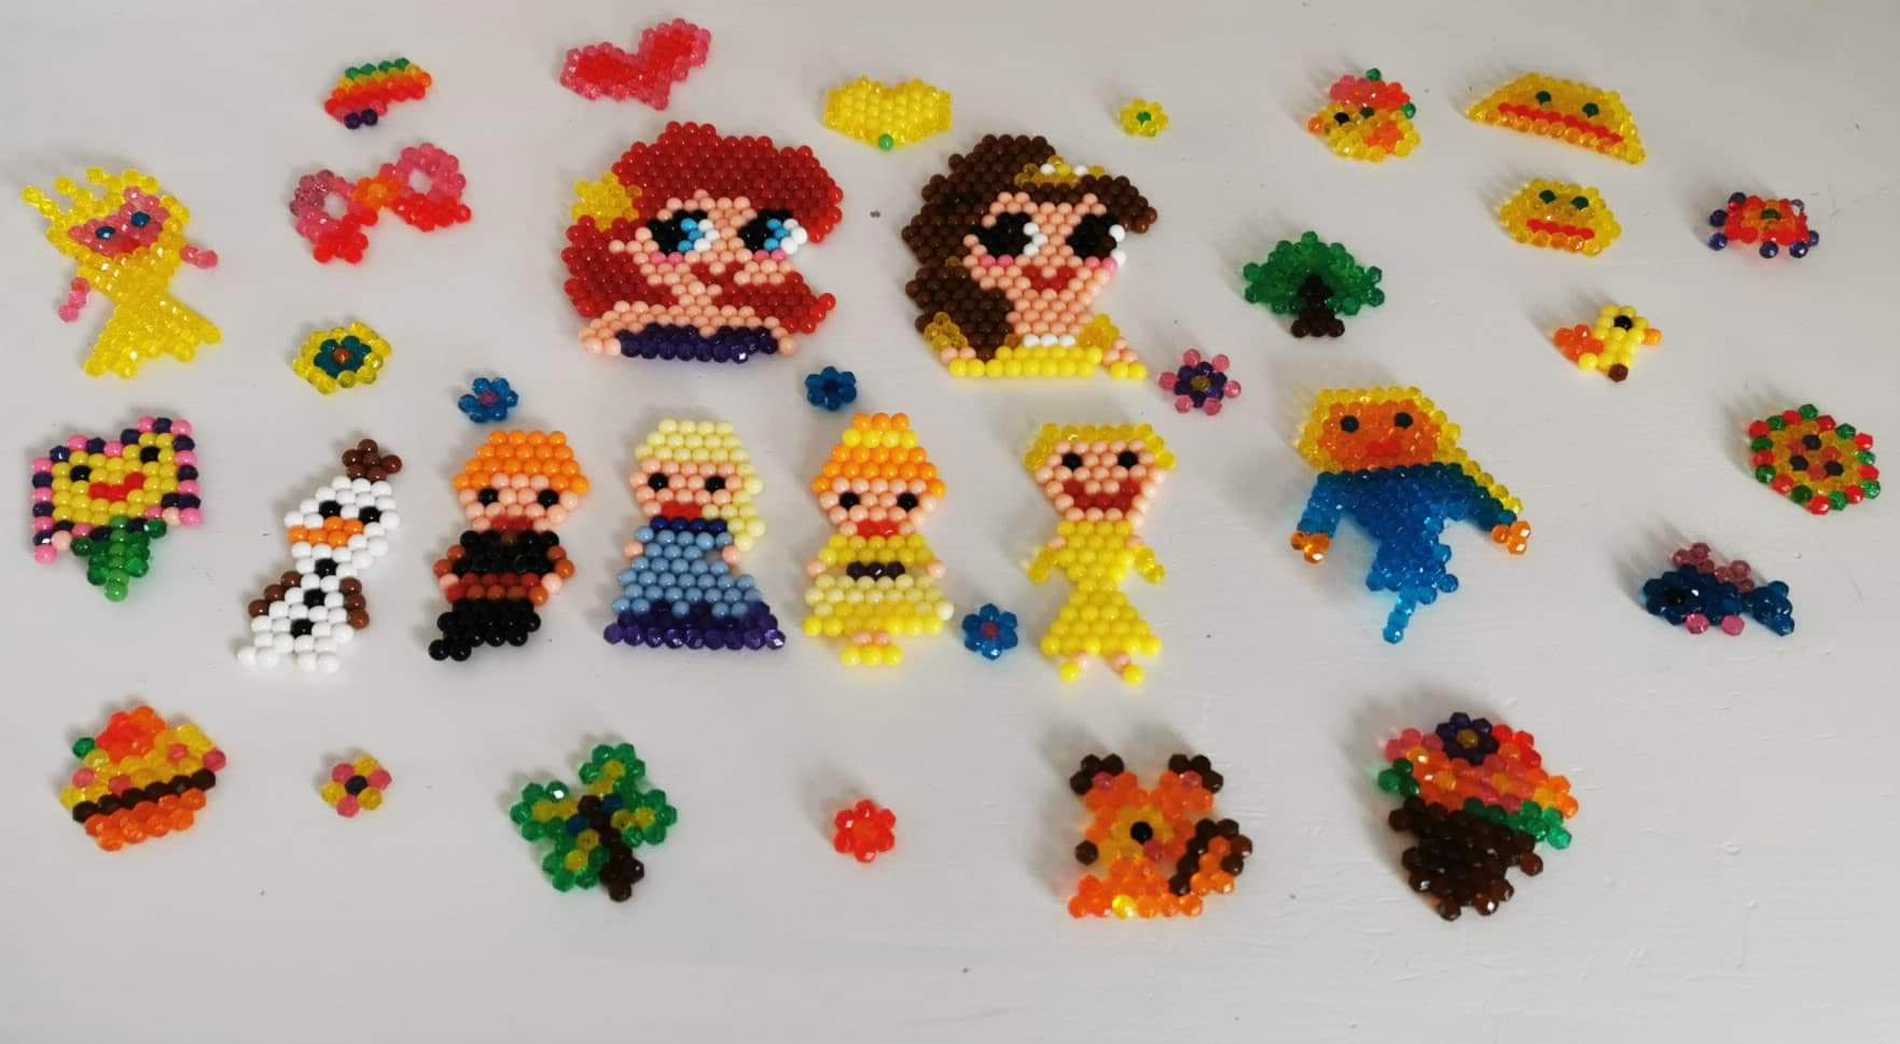 A collection of colourful characters, created from beads by wish child, Bethany.